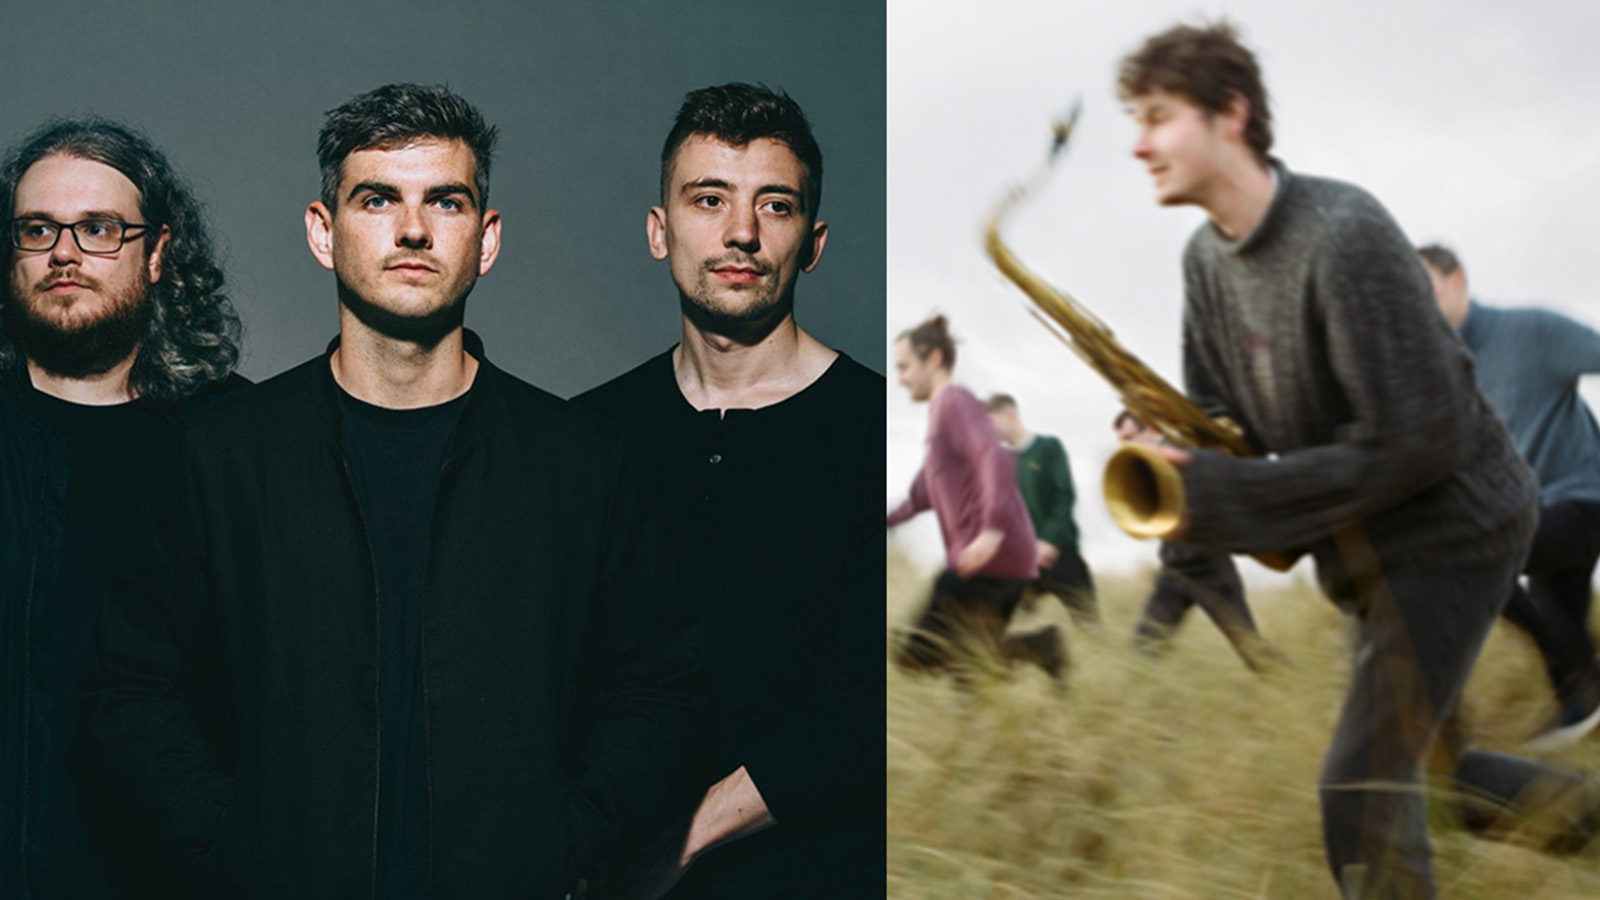 Left: Three men look at the camera wearing black against a grey background Right: A band runs through a field holding various instrumens - Matt is closest to the camera with his saxophone